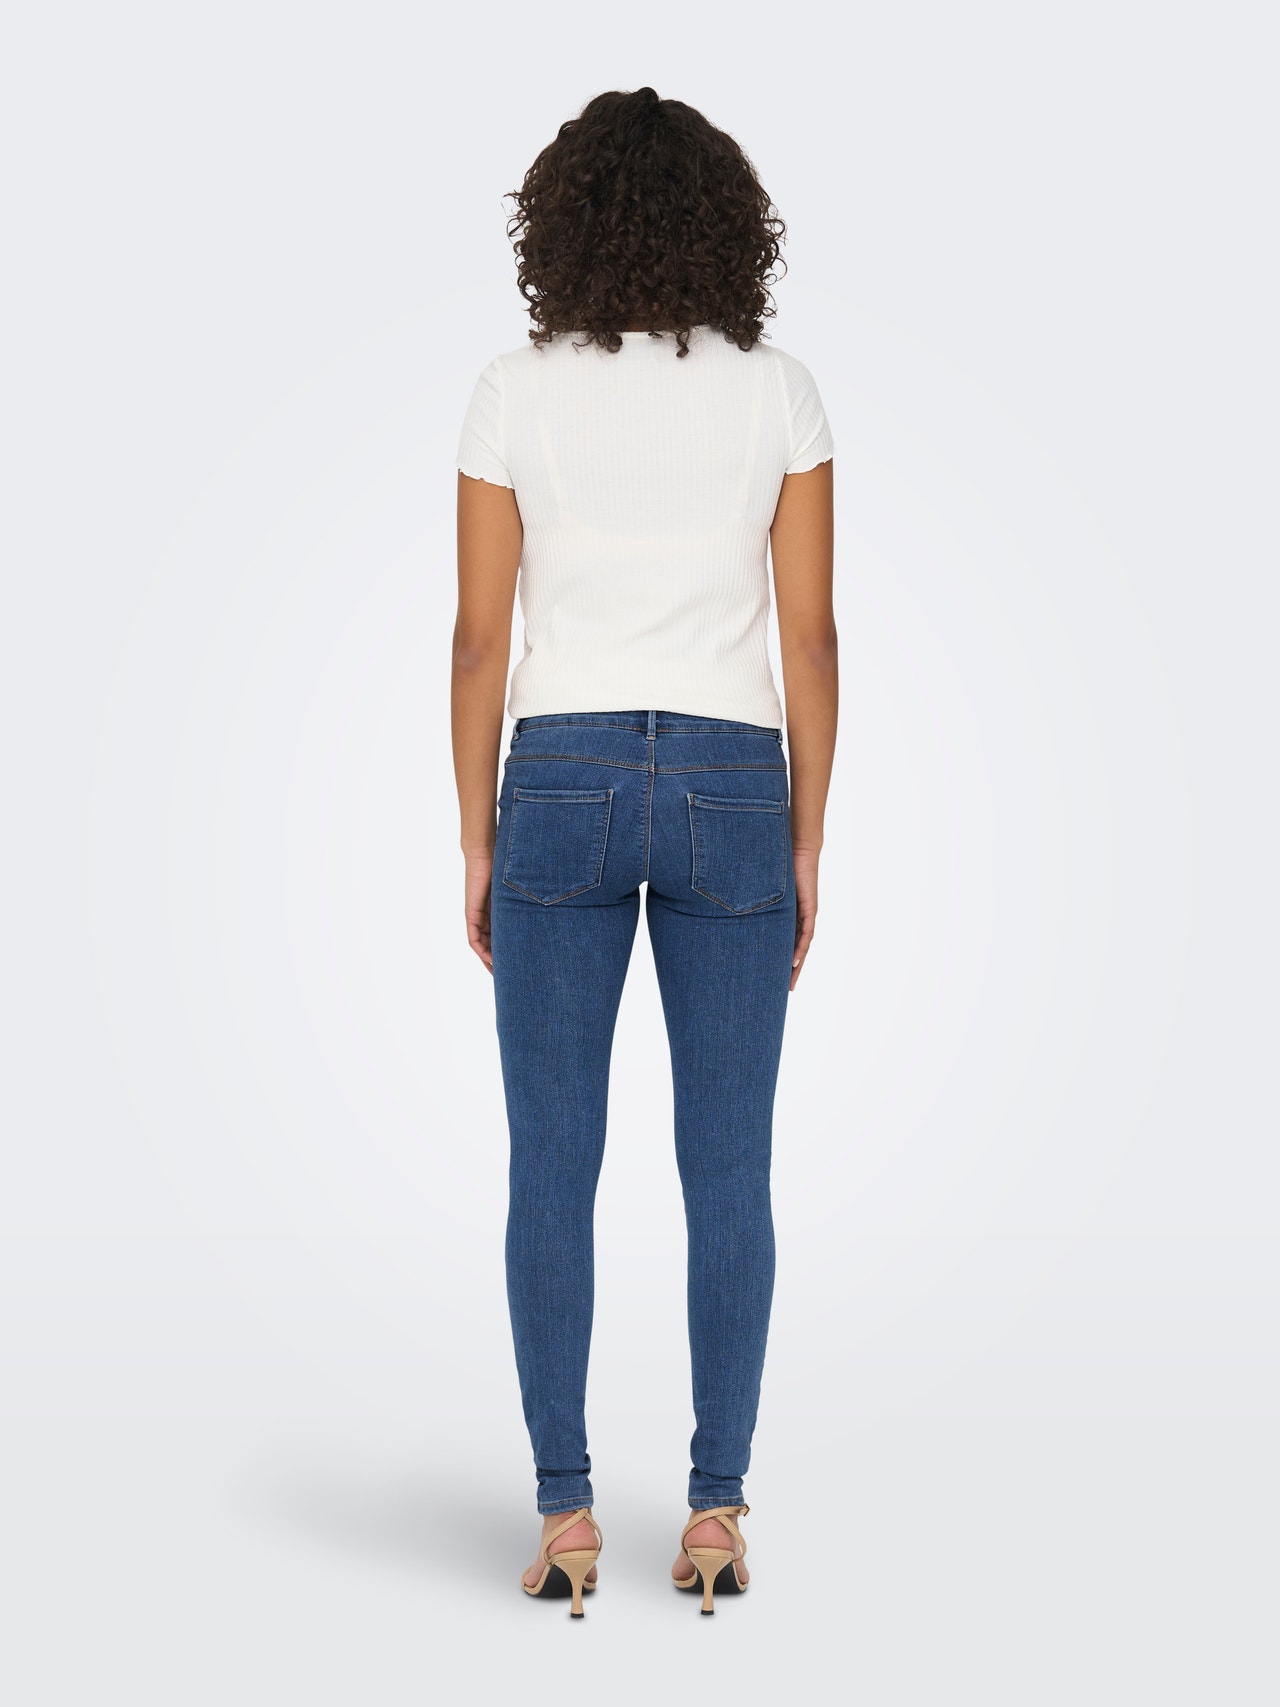 ONLY Skinny Fit Mittlere Taille Jeans -Medium Blue Denim - 15257023